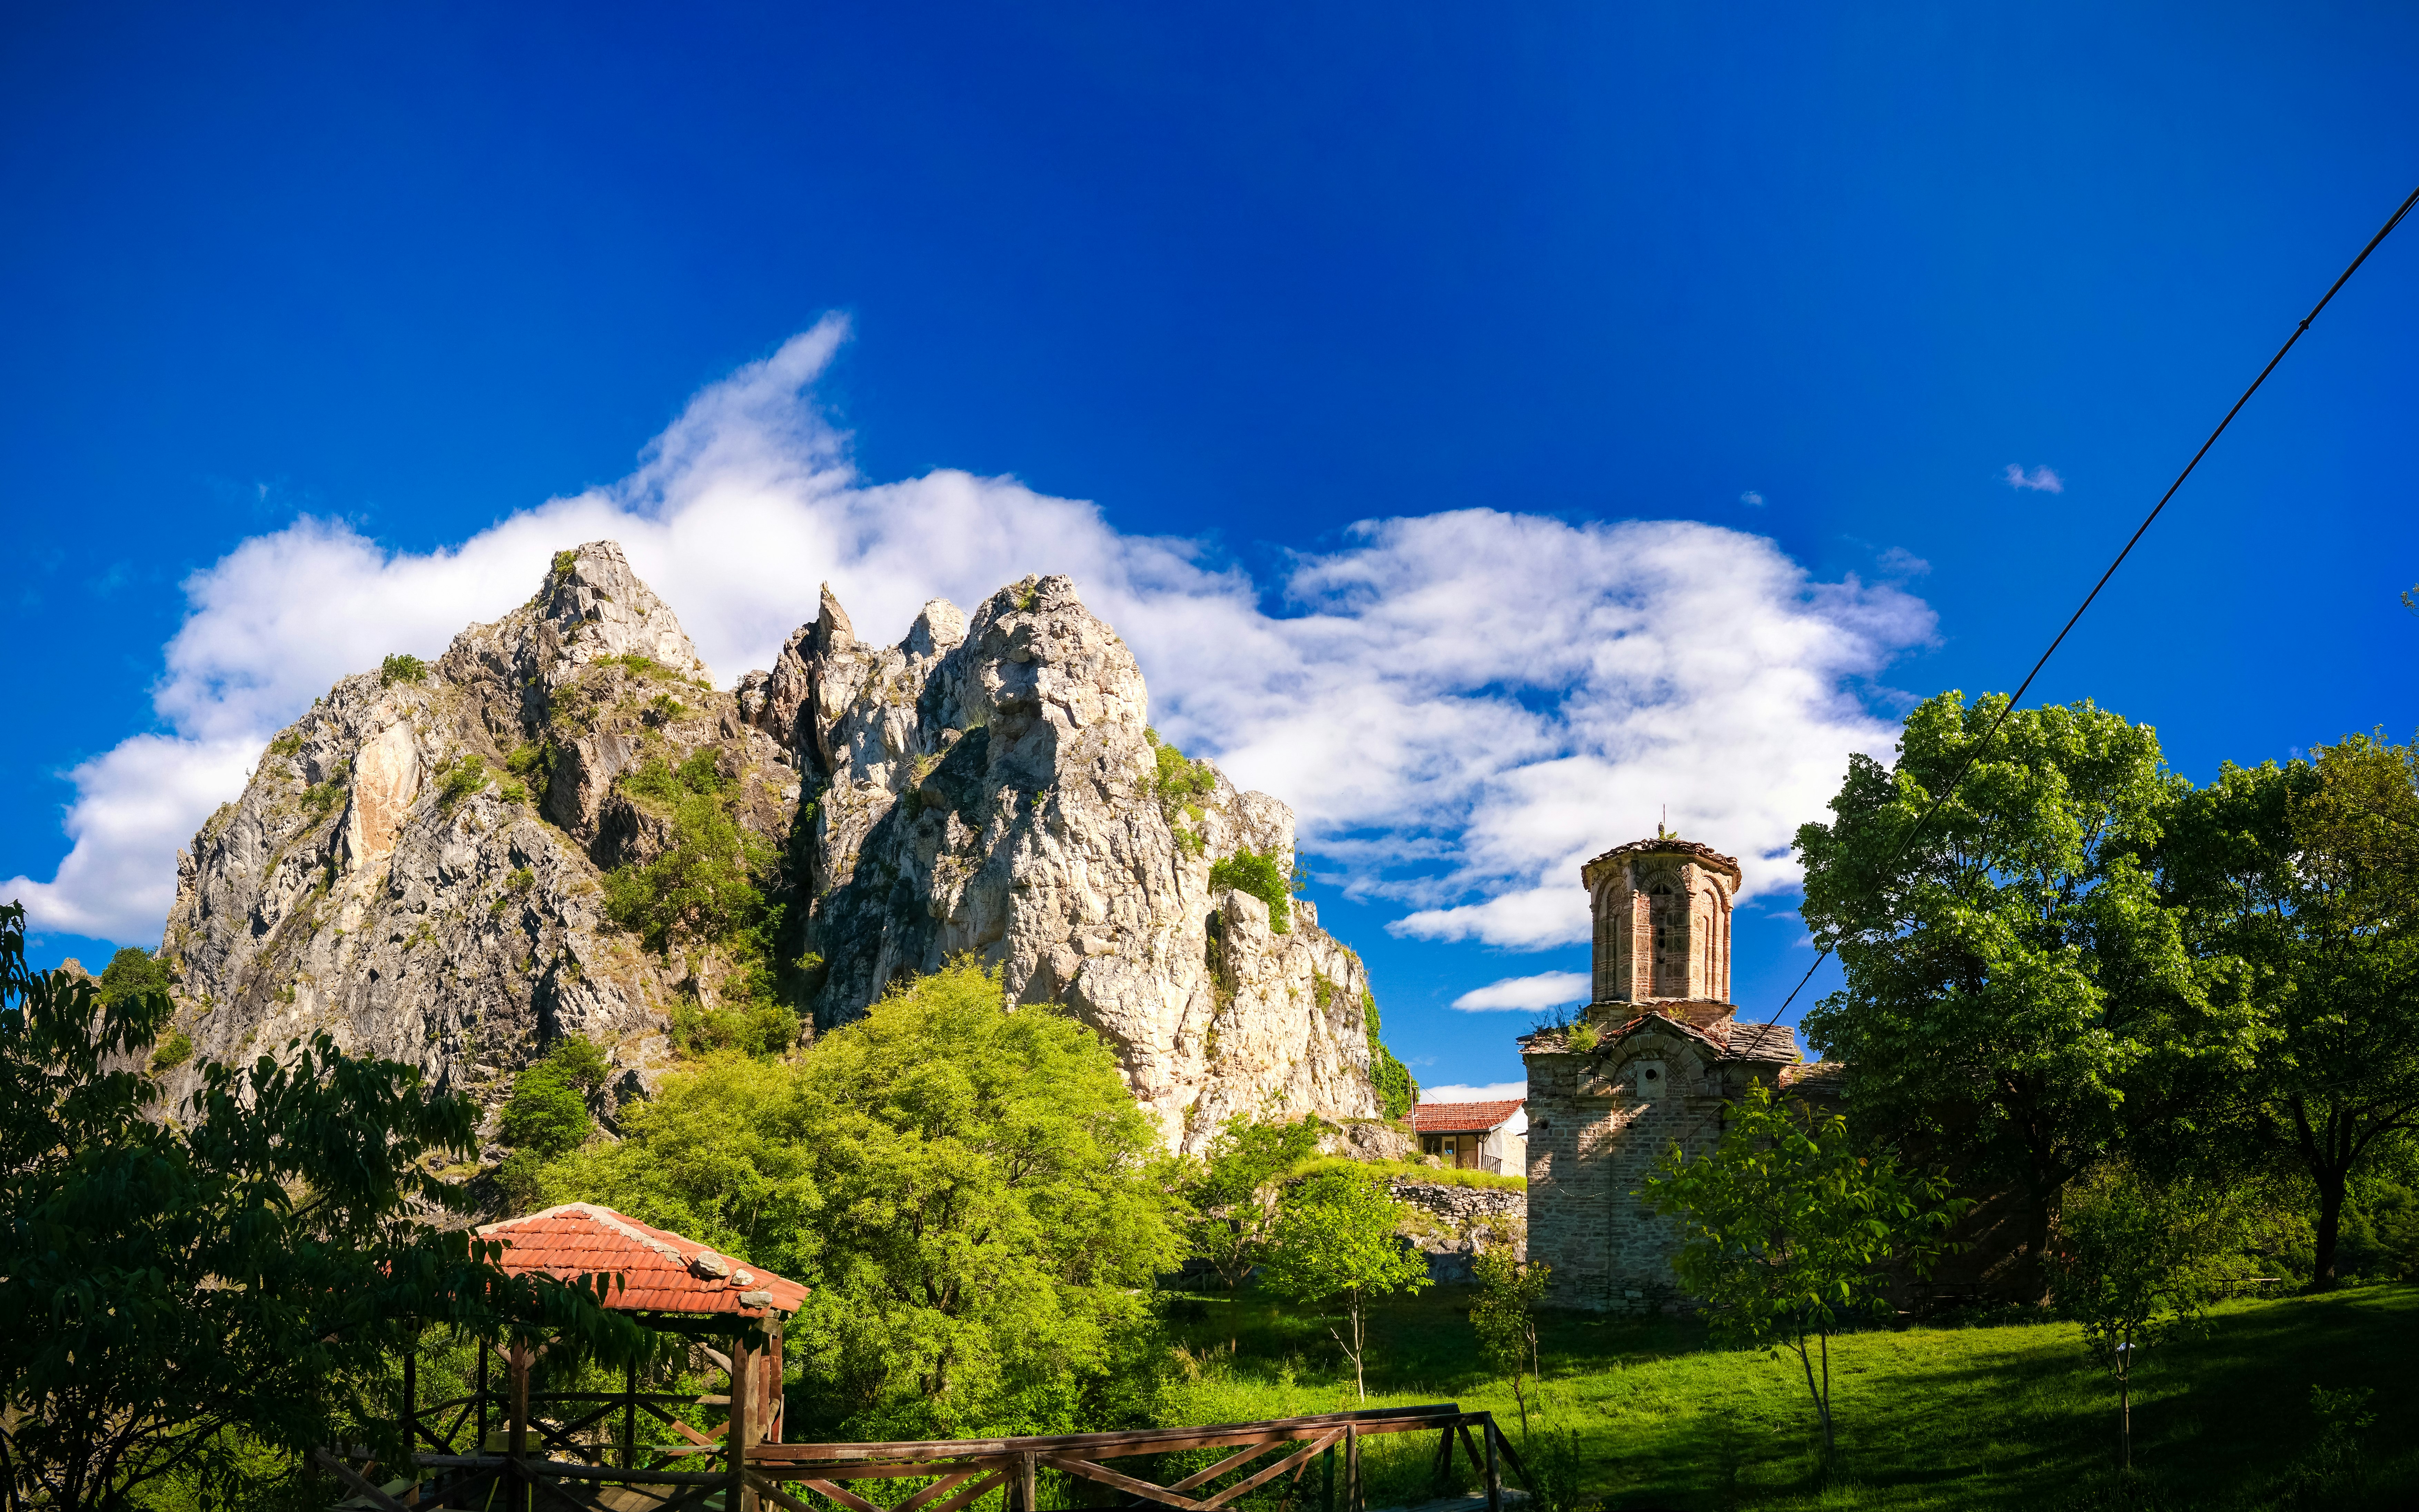 A stone monastery with red roofs is nestled between tall green trees and a portion of the jagged Sar mountain range; Best in Travel North Macedonia  